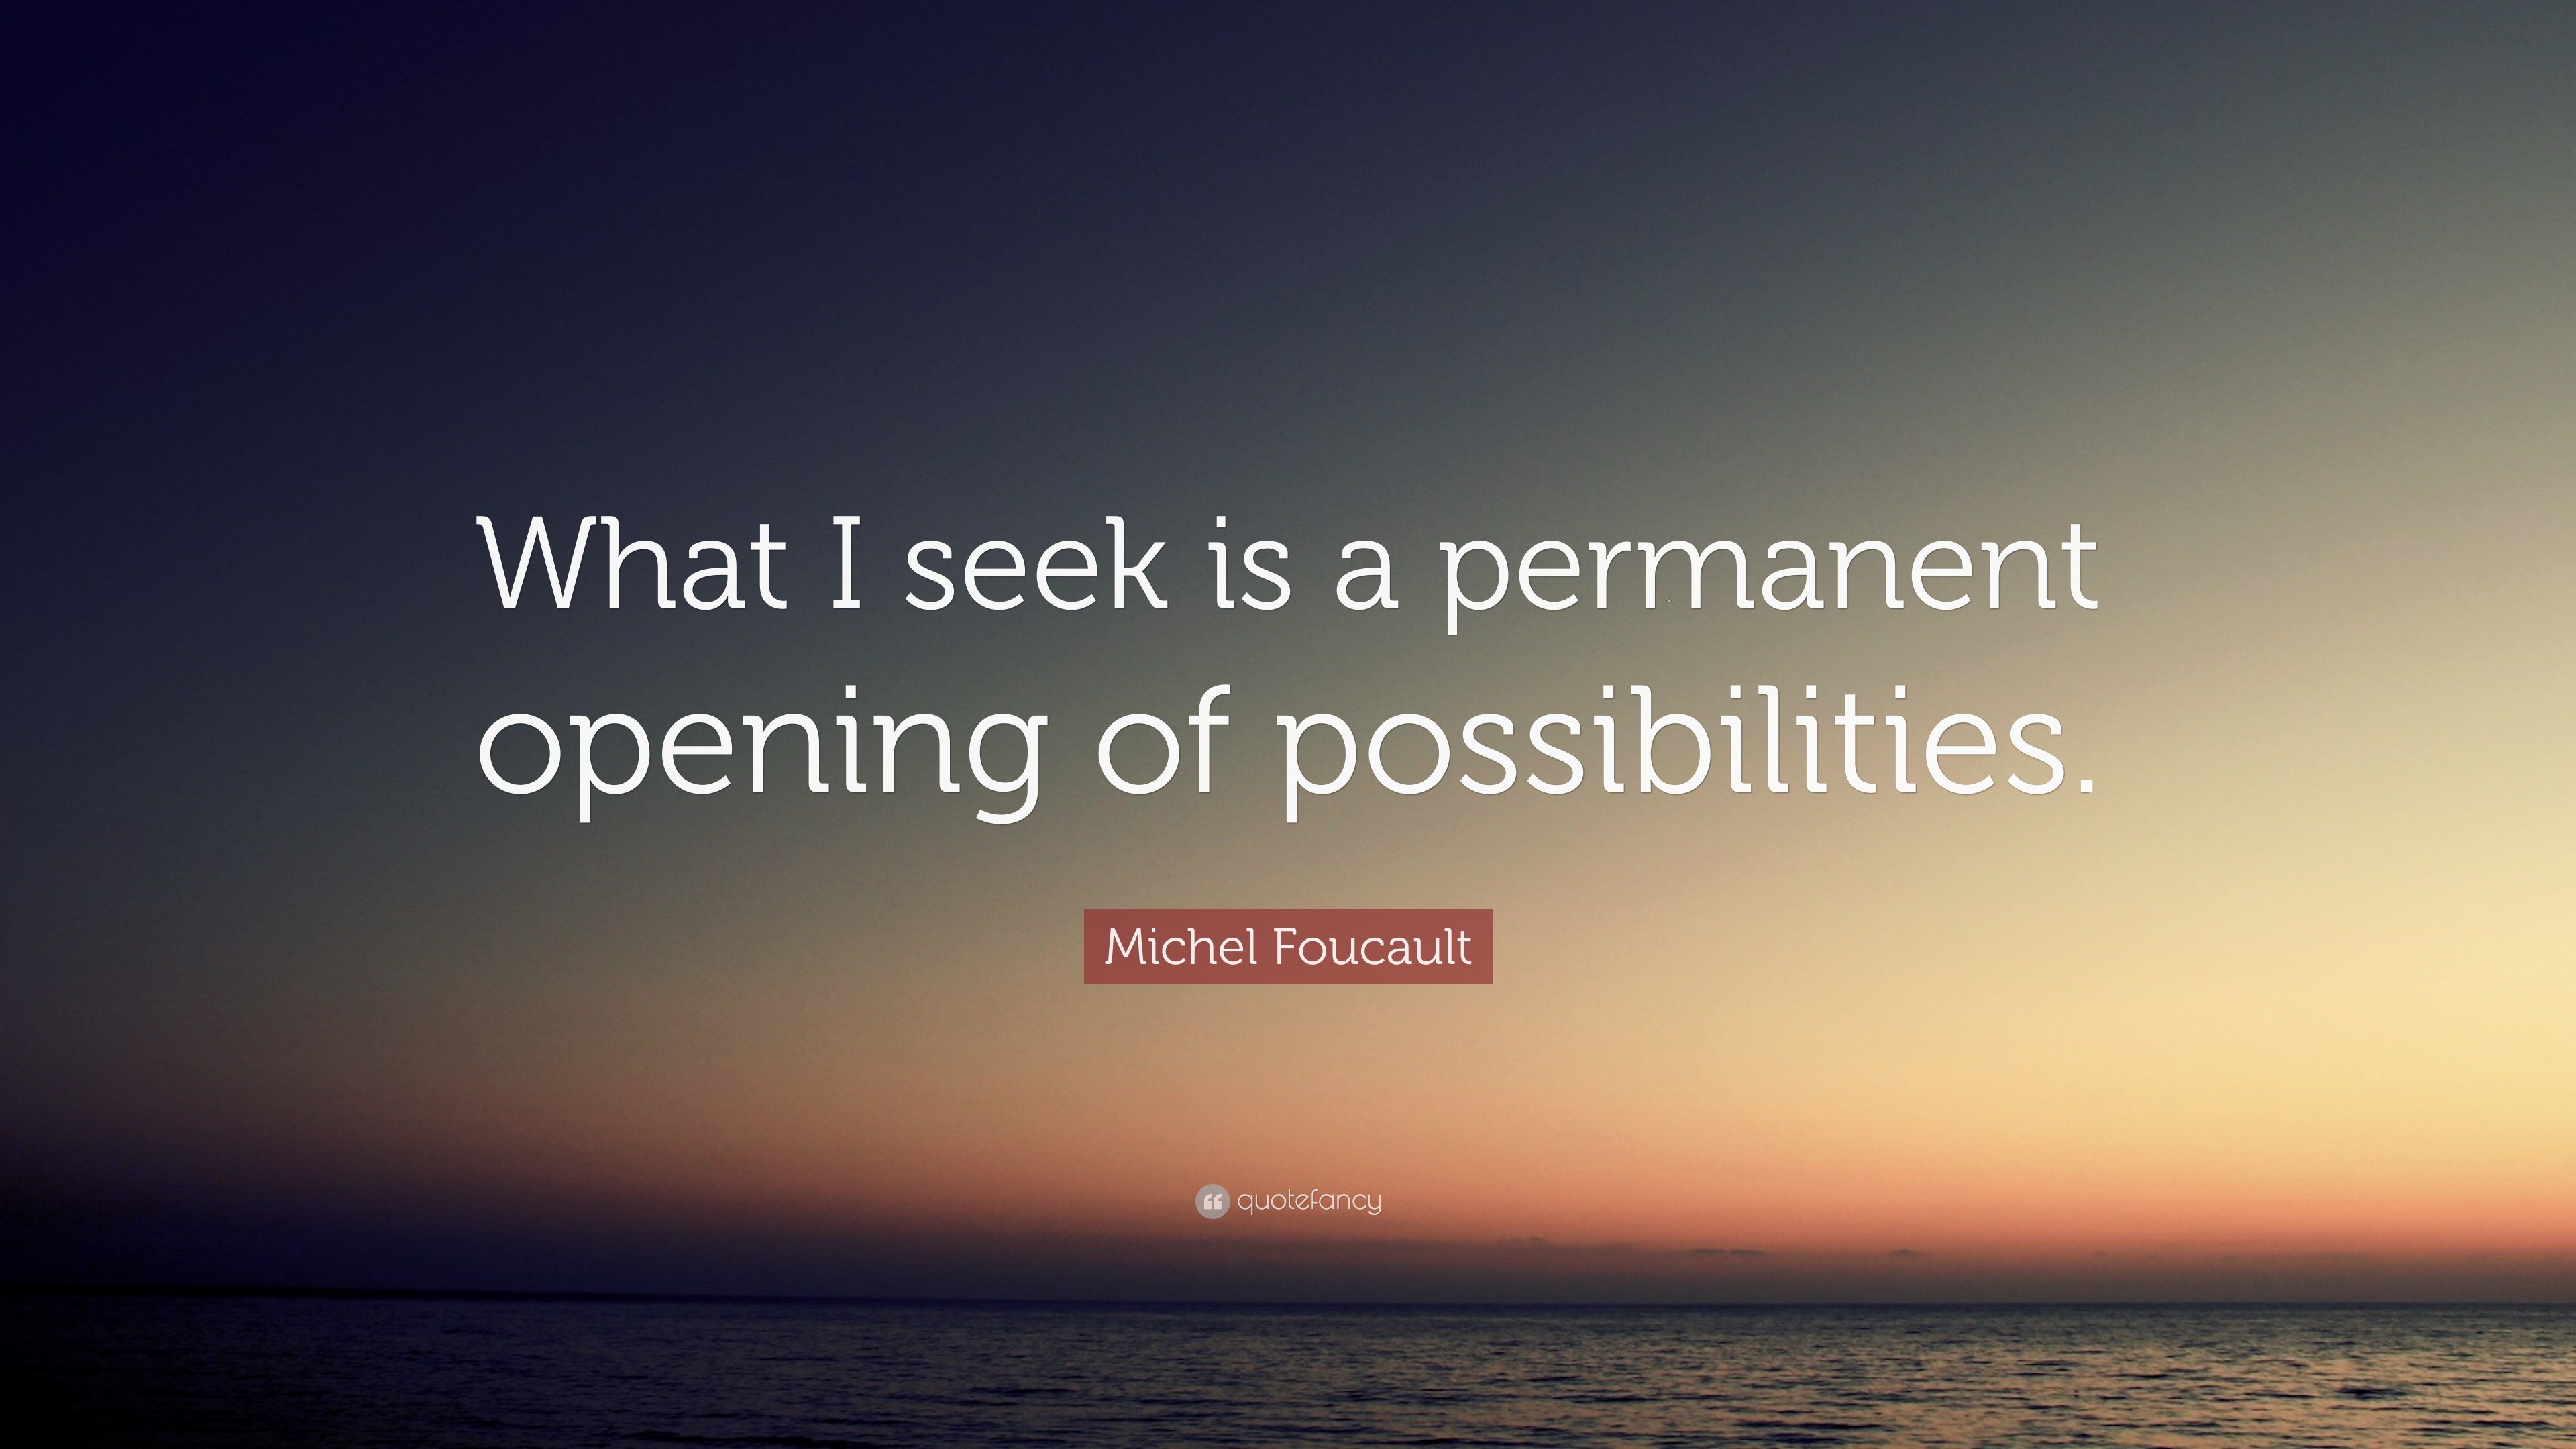 Michel Foucault Quote: “What I seek is a permanent opening of ...